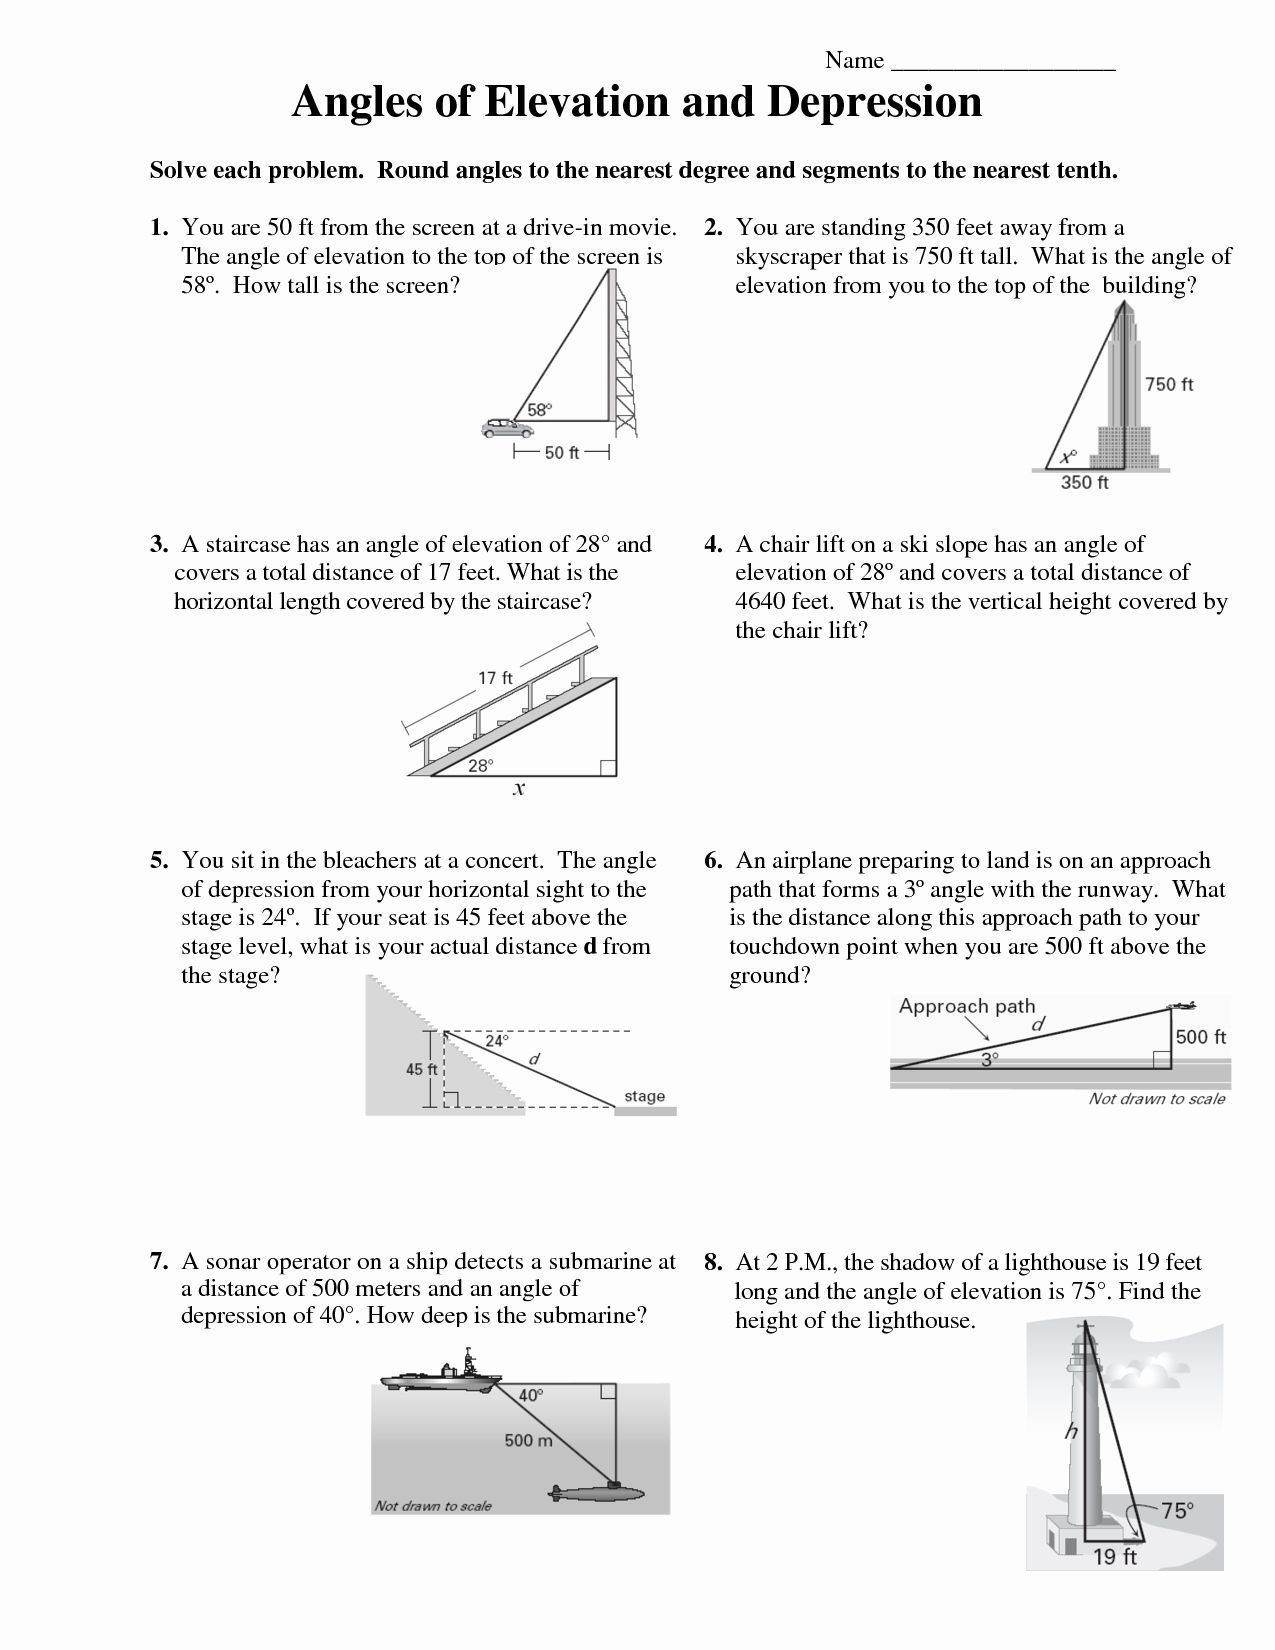 Self Esteem Worksheets Pdf  Briefencounters In Angle Of Elevation And Depression Worksheet Pdf